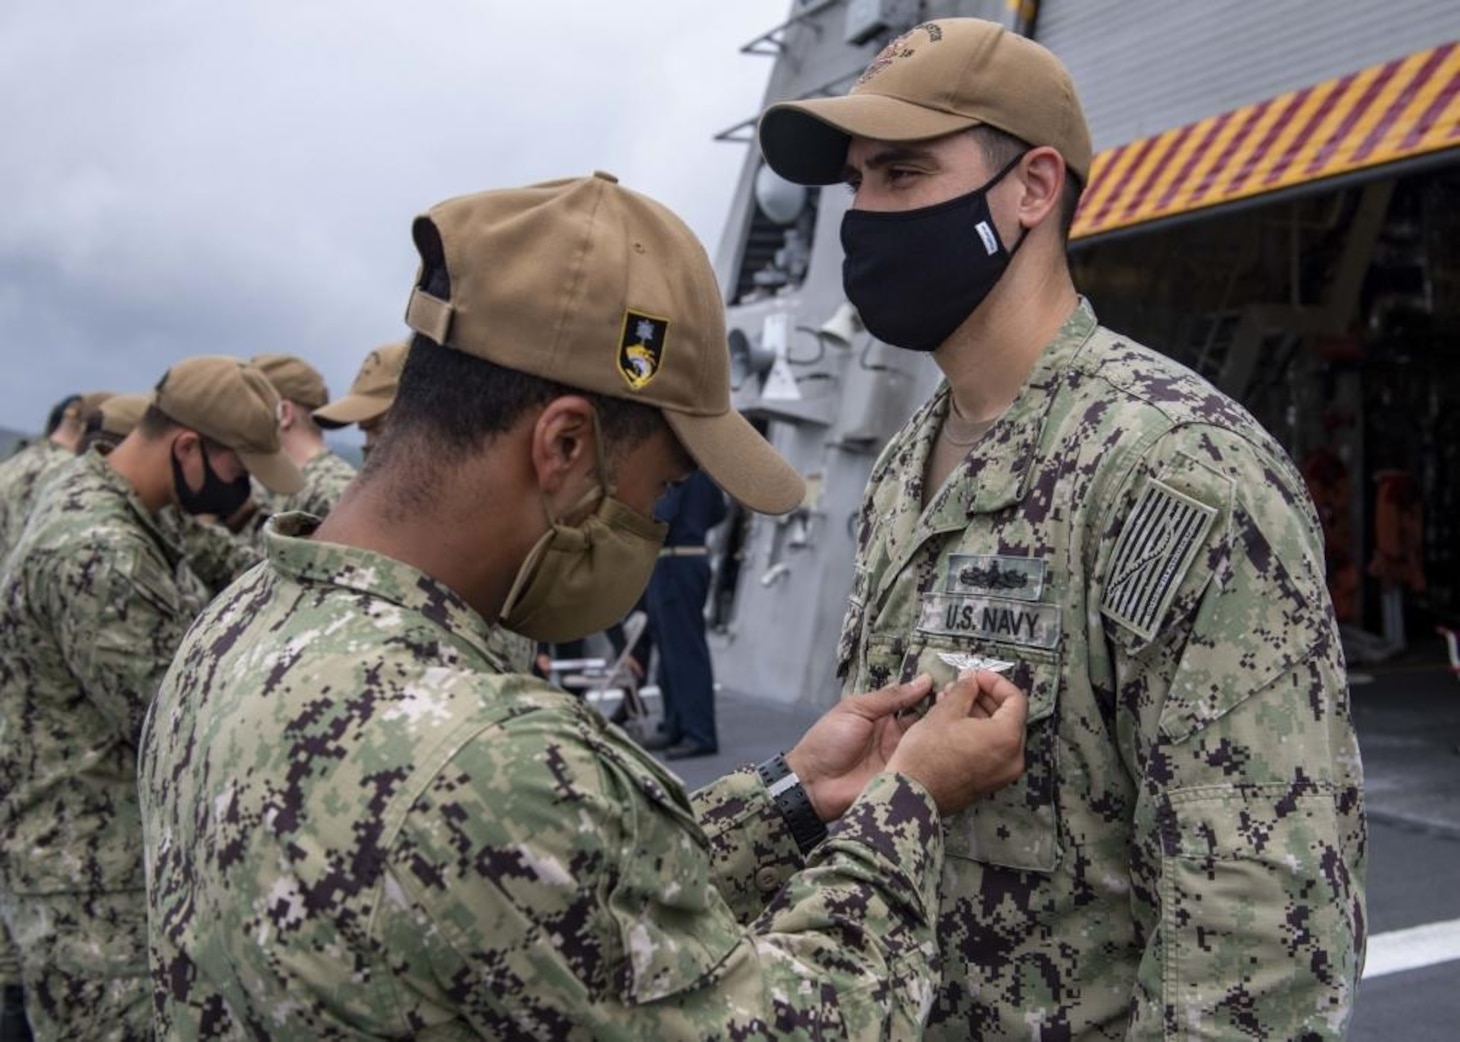 210831-N-WU807-1159 APRA HARBOR, Guam (Aug. 31, 2021) Master Chief Damage Controlman Christian Bolanos, right, from Buga, Colombia, receives the Enlisted Air Warfare Specialist (EAWS) pin from Chief Engineman Jaron White, from Victorville, Calif., during an award ceremony aboard Independence-variant littoral combat ship USS Charleston (LCS 18), Aug. 31. Charleston, part of Destroyer Squadron Seven, is on a rotational deployment operating in the U.S. 7th Fleet area of operation to enhance interoperability with partners and serve as a ready-response force in support of a free and open Indo-Pacific region. (U.S. Navy photo by Mass Communication Specialist 2nd Class Adam Butler)